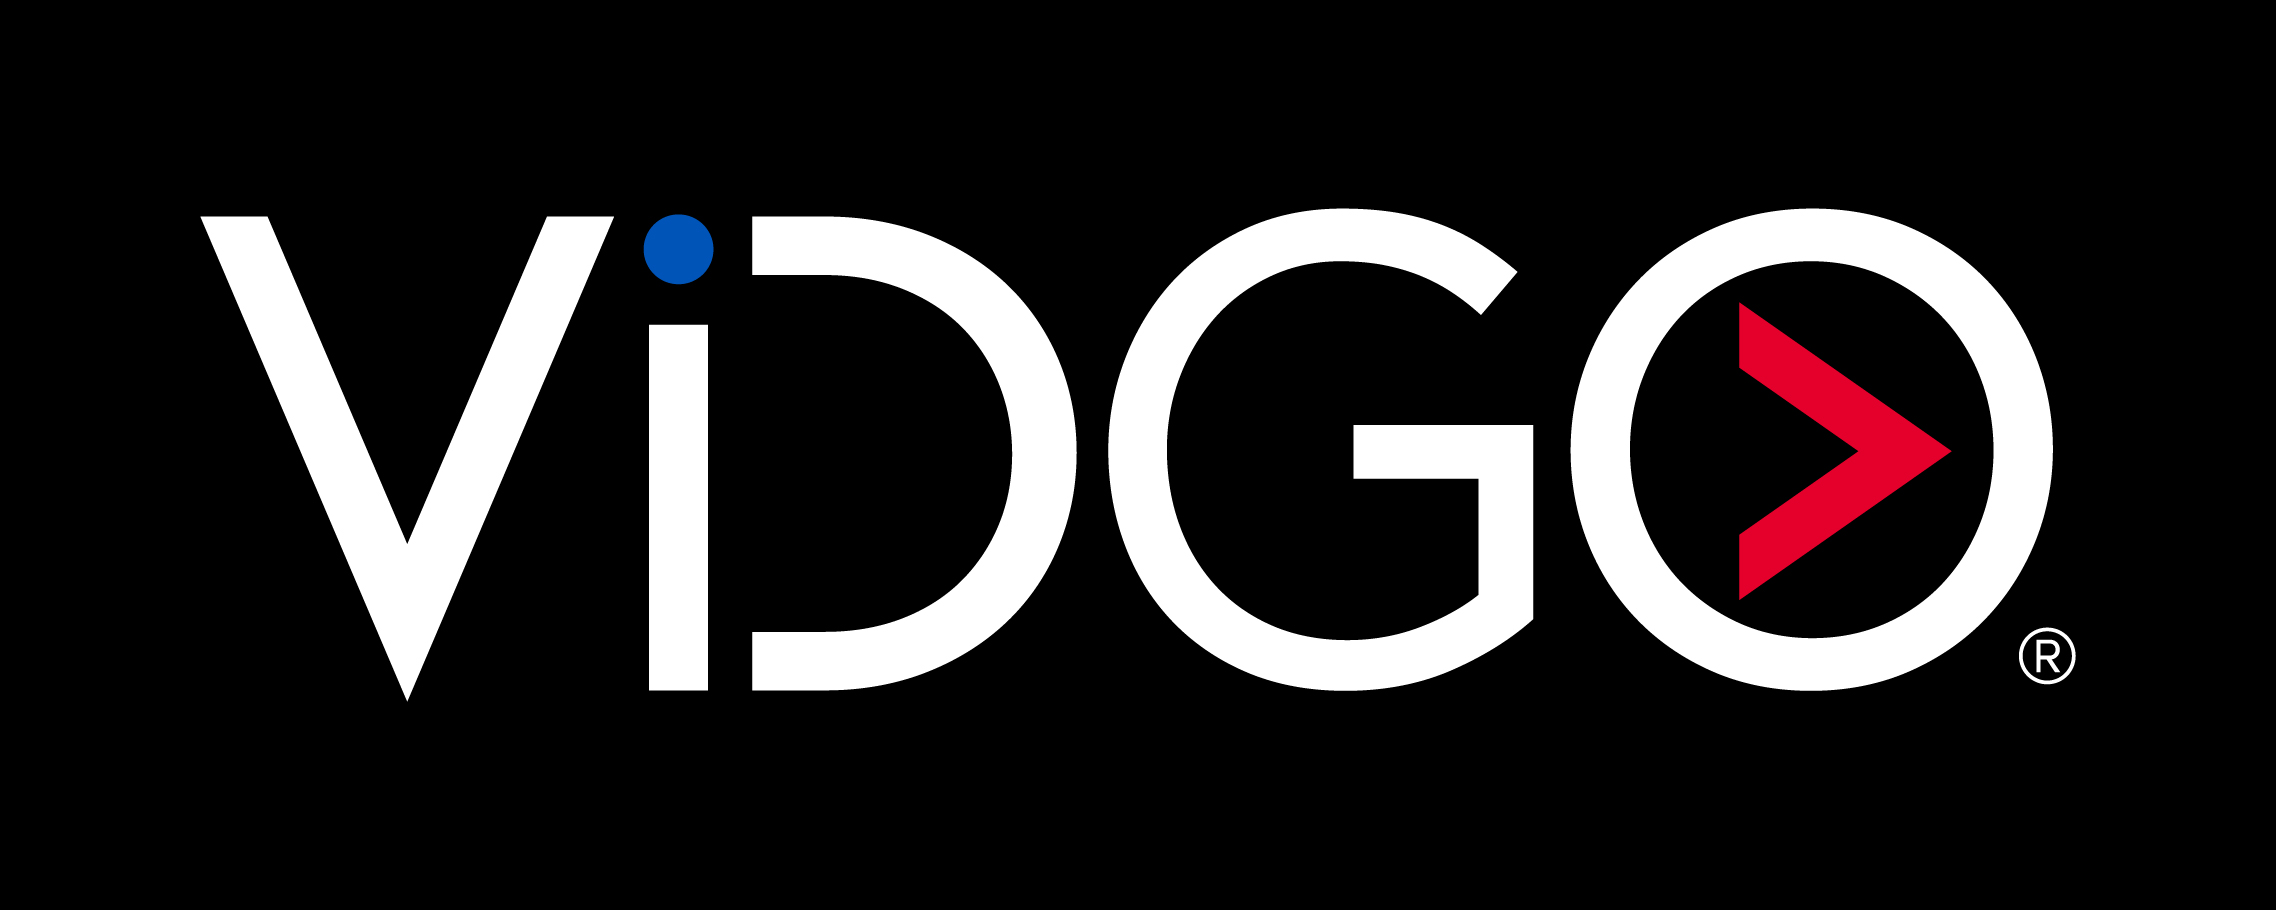 Vidgo Adds The Tennis Channel to Its Lineup